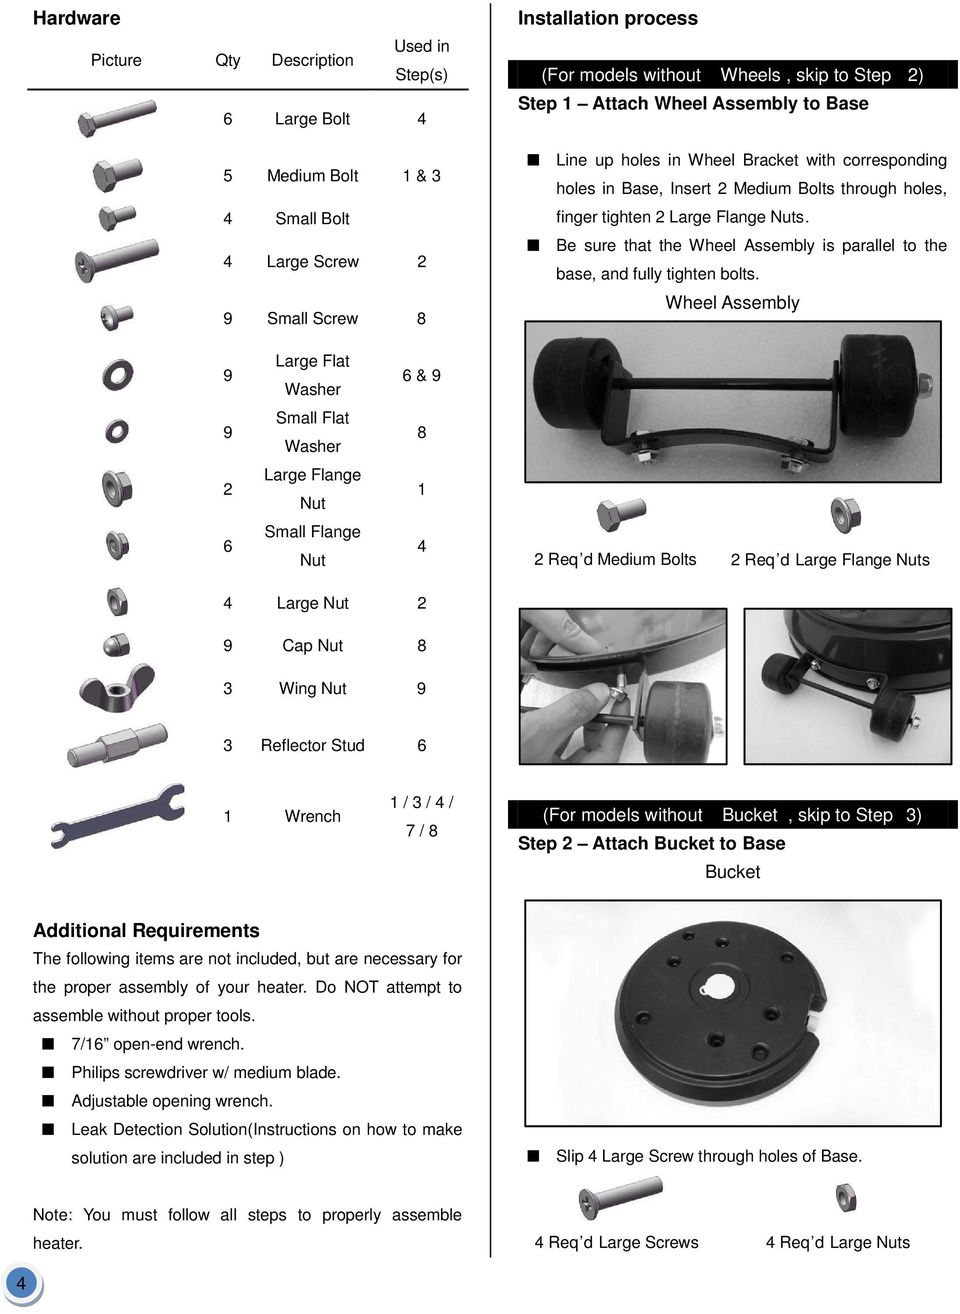 Assembly is parallel to the base, and fully tighten bolts Wheel Assembly 9 Large Flat Washer 6 & 9 9 Small Flat Washer 8 2 Large Flange Nut 1 6 Small Flange Nut 4 2 Req d Medium Bolts 2 Req d Large